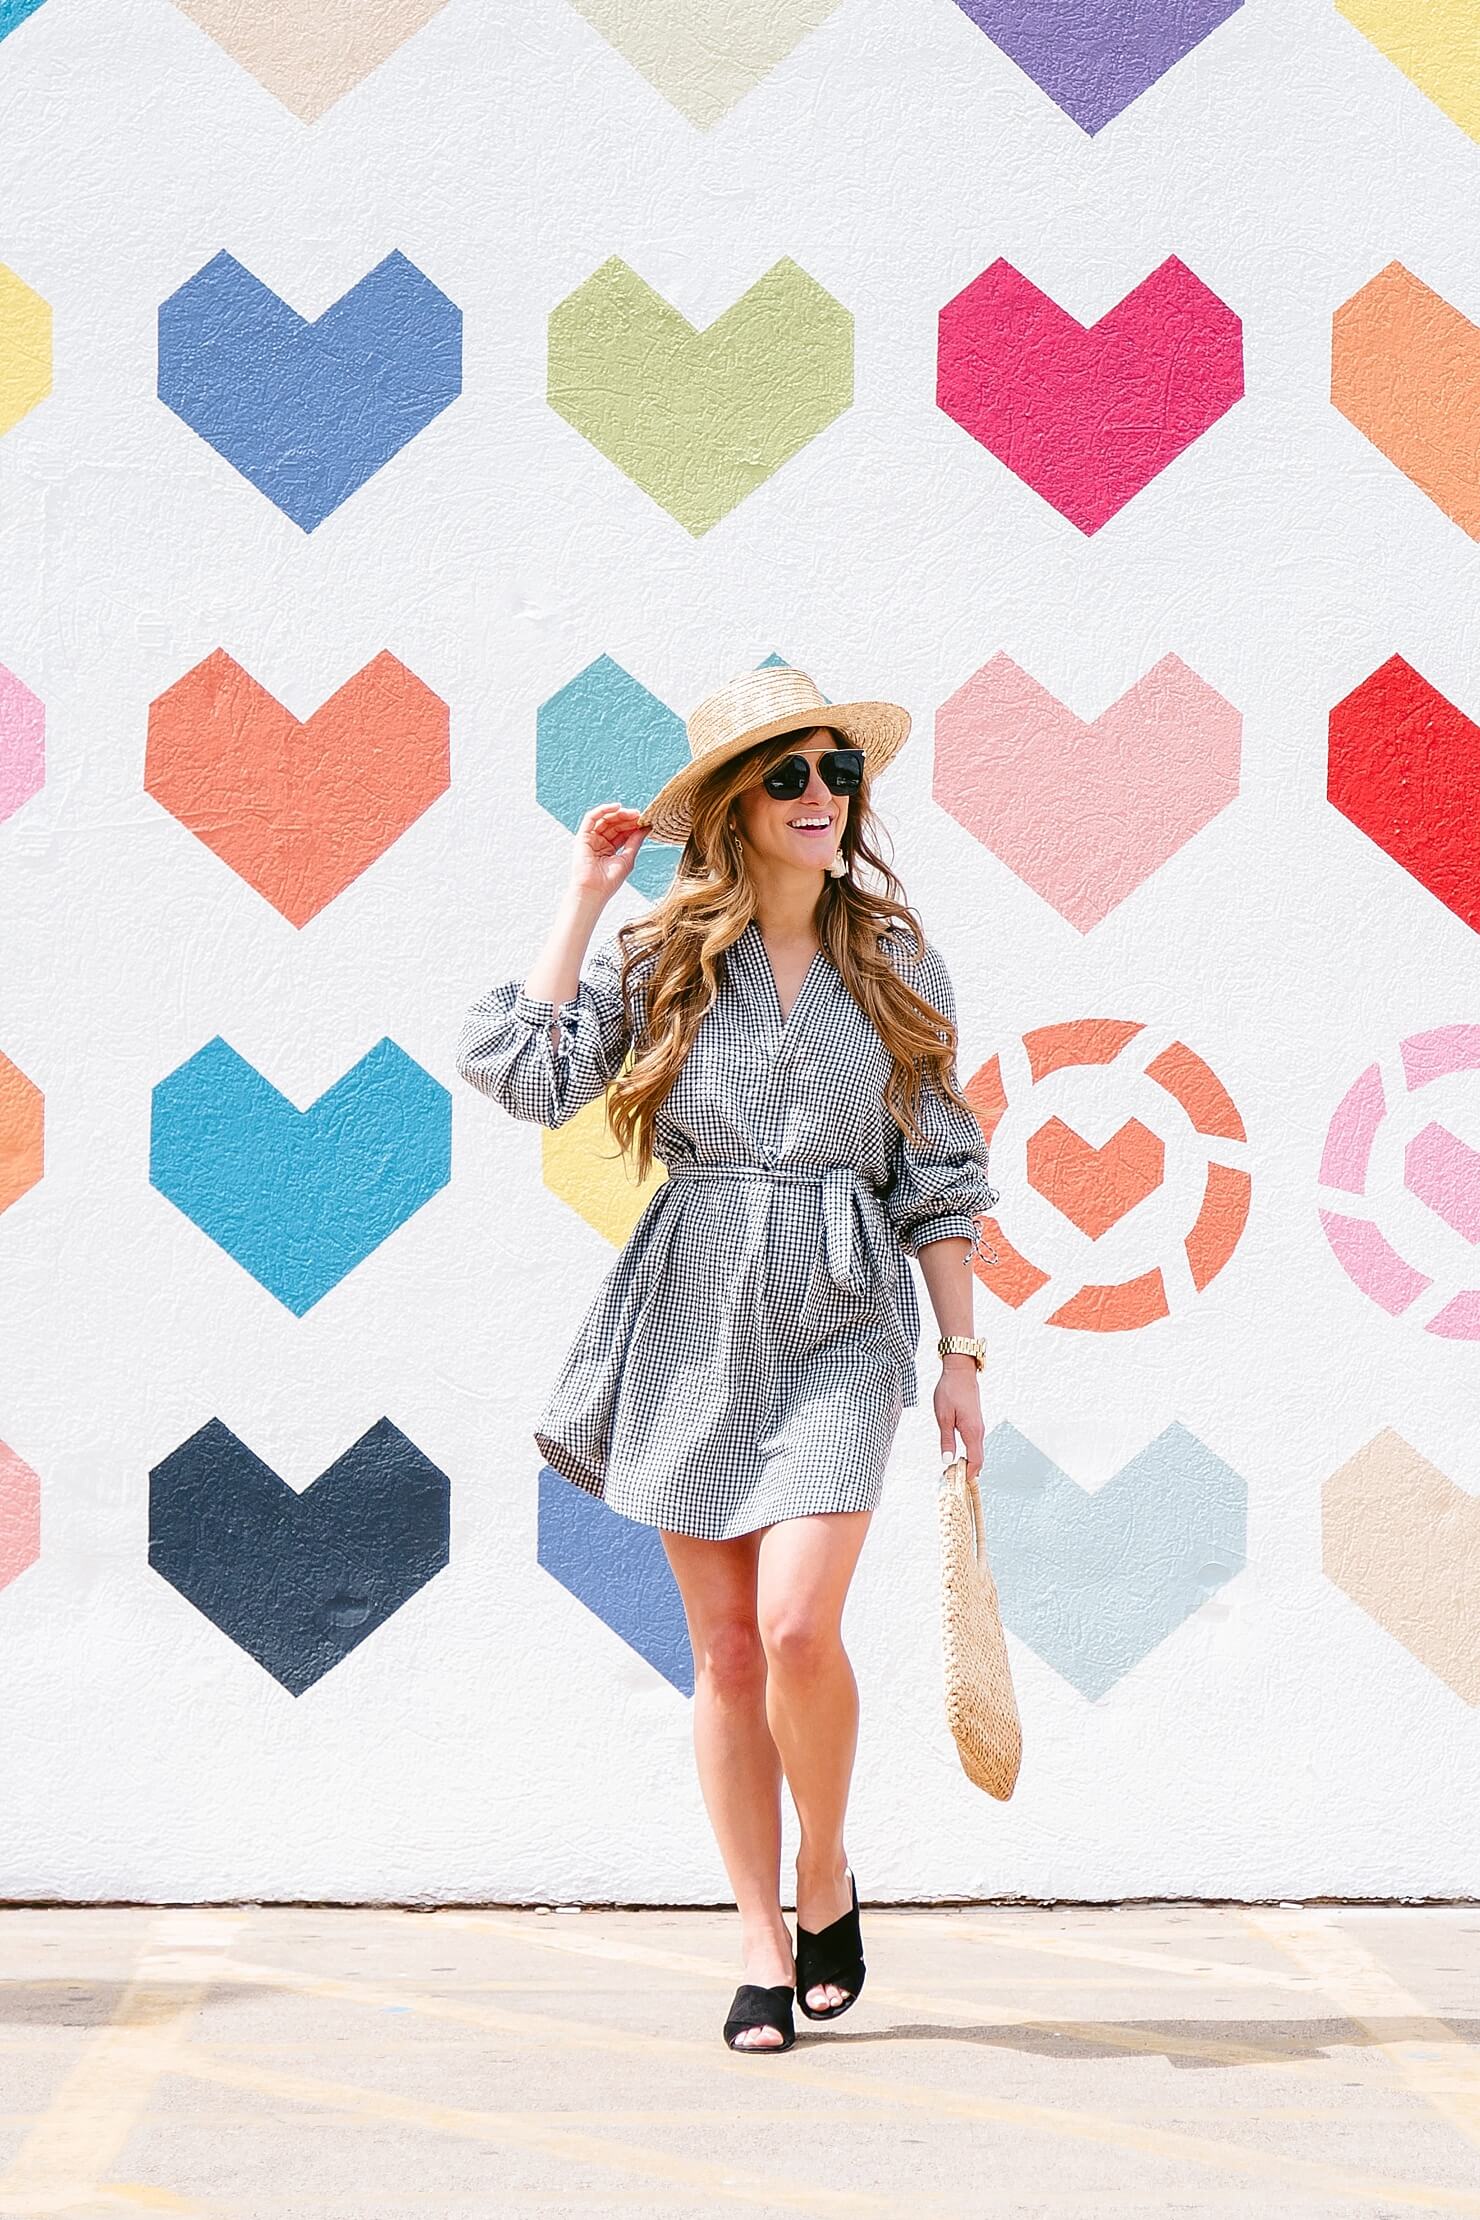 brighton keller wearing gingham dress with mules and boater hat 